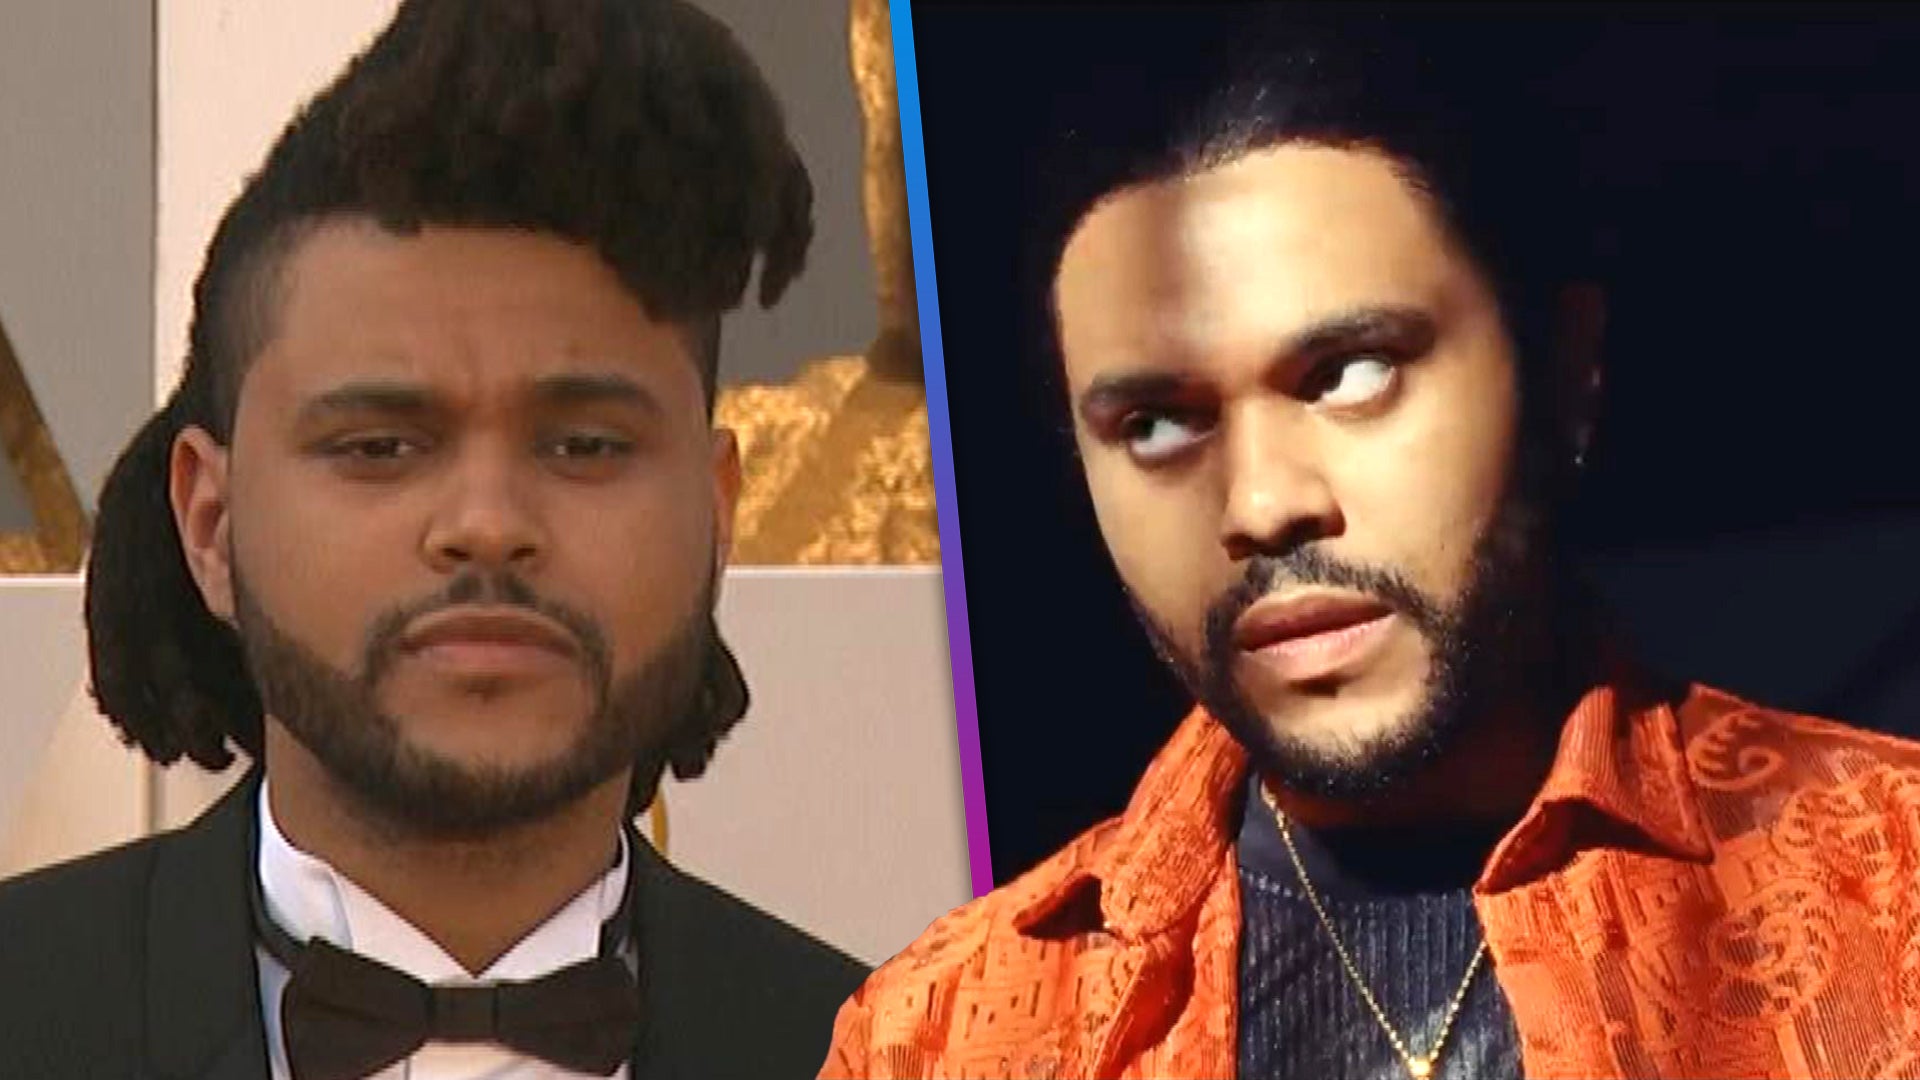 The Weeknd on 'The Idol' Rumors and Criticism: 'I've Been Judged